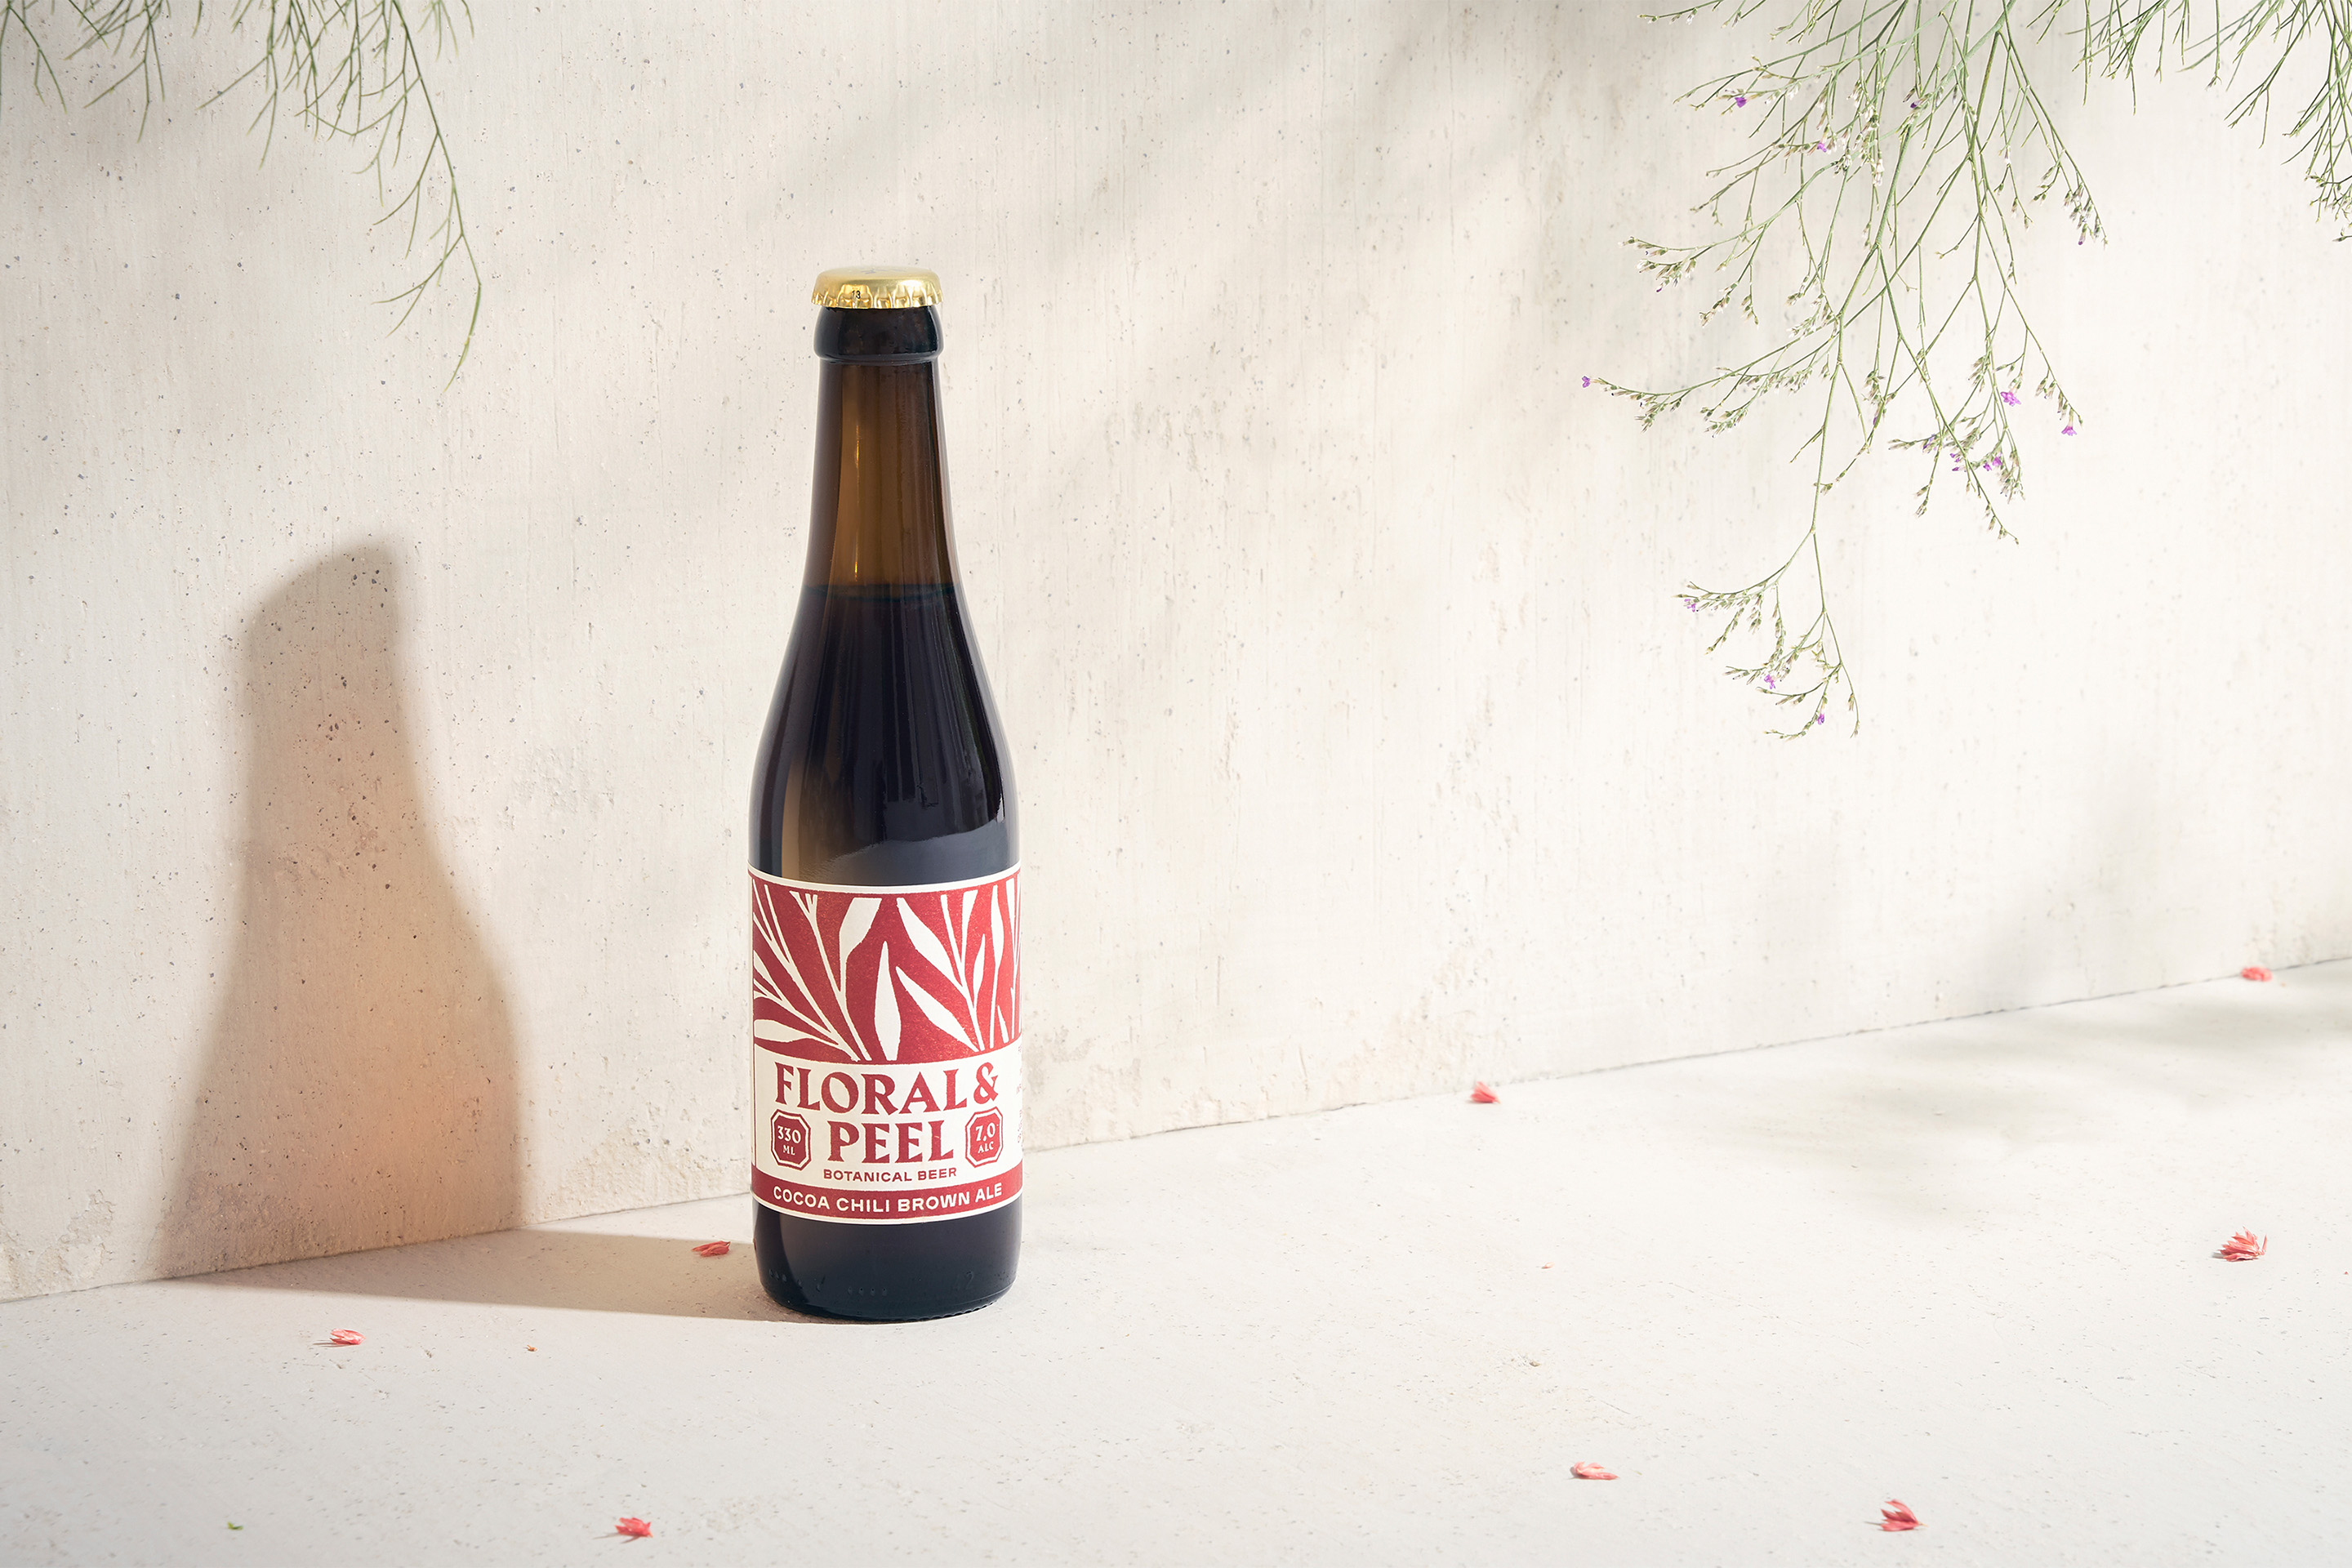 Neumeister packaging design Floral & Peel Cocoa Chili Brown Ale beer bottle